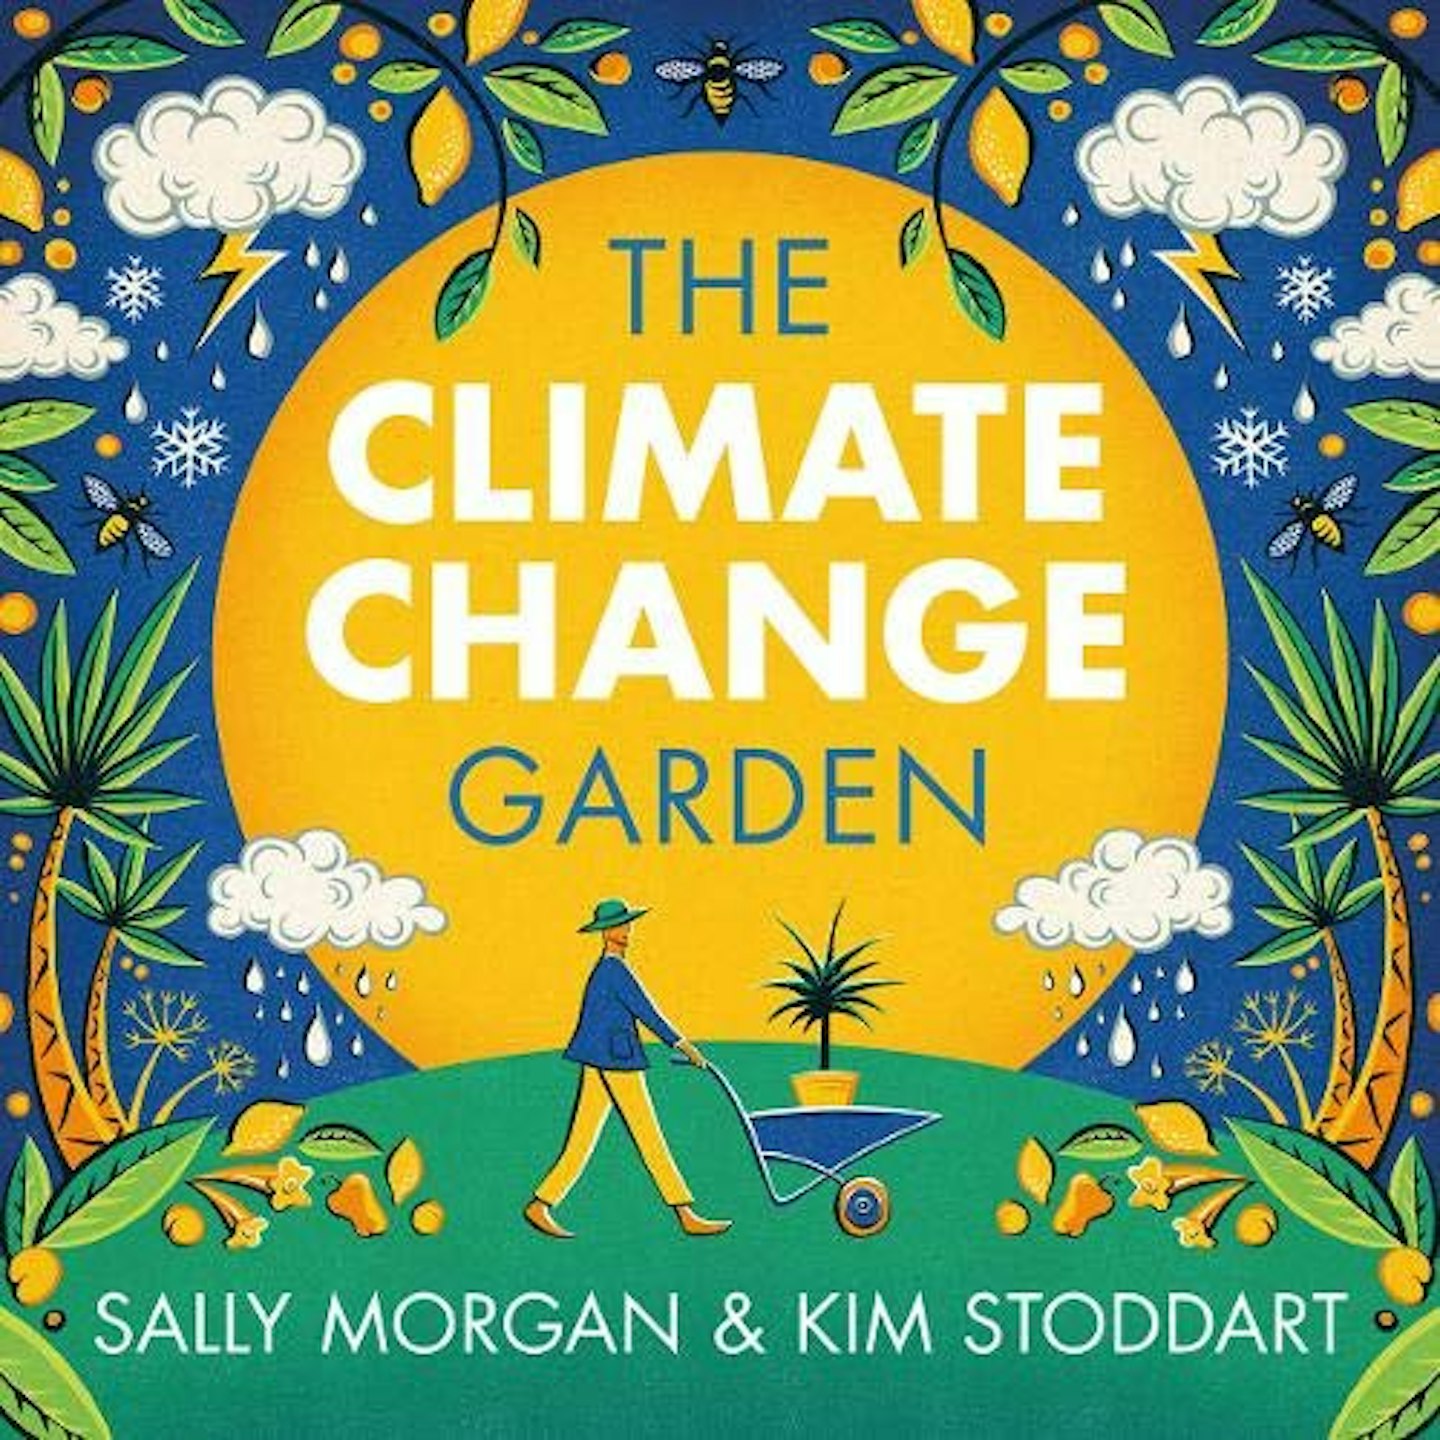 THE CLIMATE CHANGE GARDEN BY SALLY MORGAN AND KIM STODDART